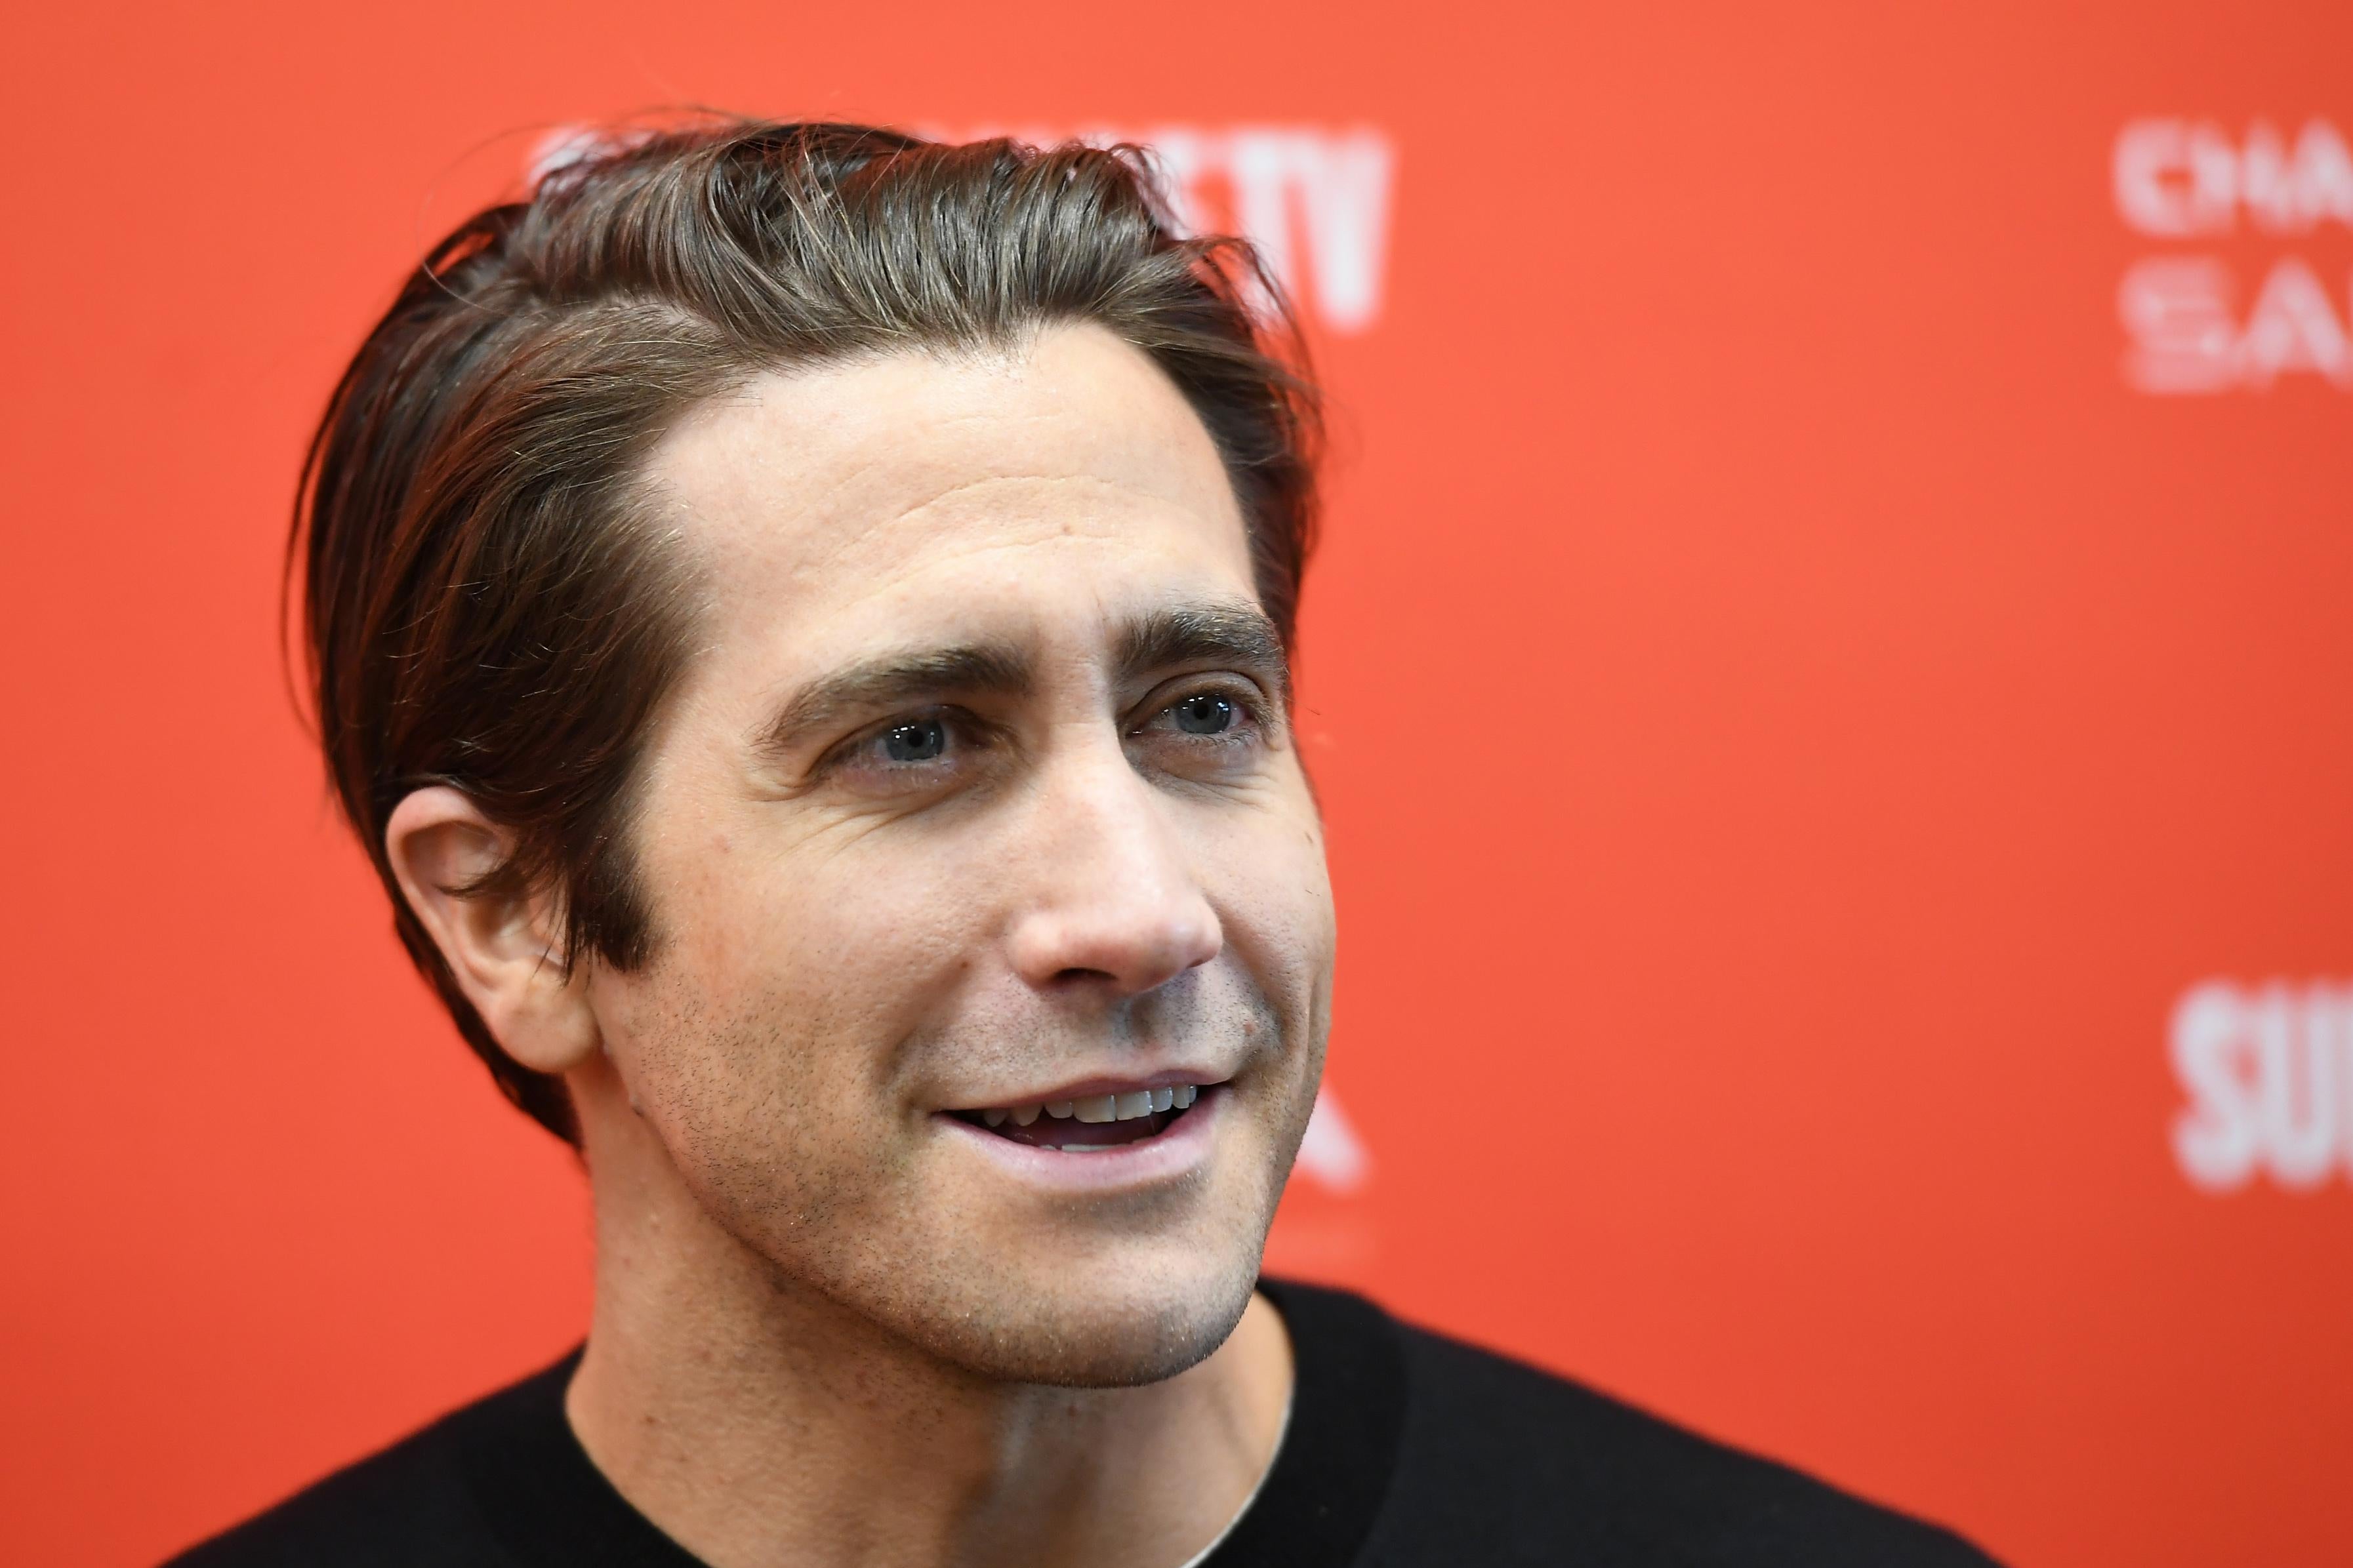 Actor Jake Gyllenhaal attends the Wildlife Premiere during the 2018 Sundance Film Festival at Eccles Theater on January 20, 2018 in Park City, Utah.